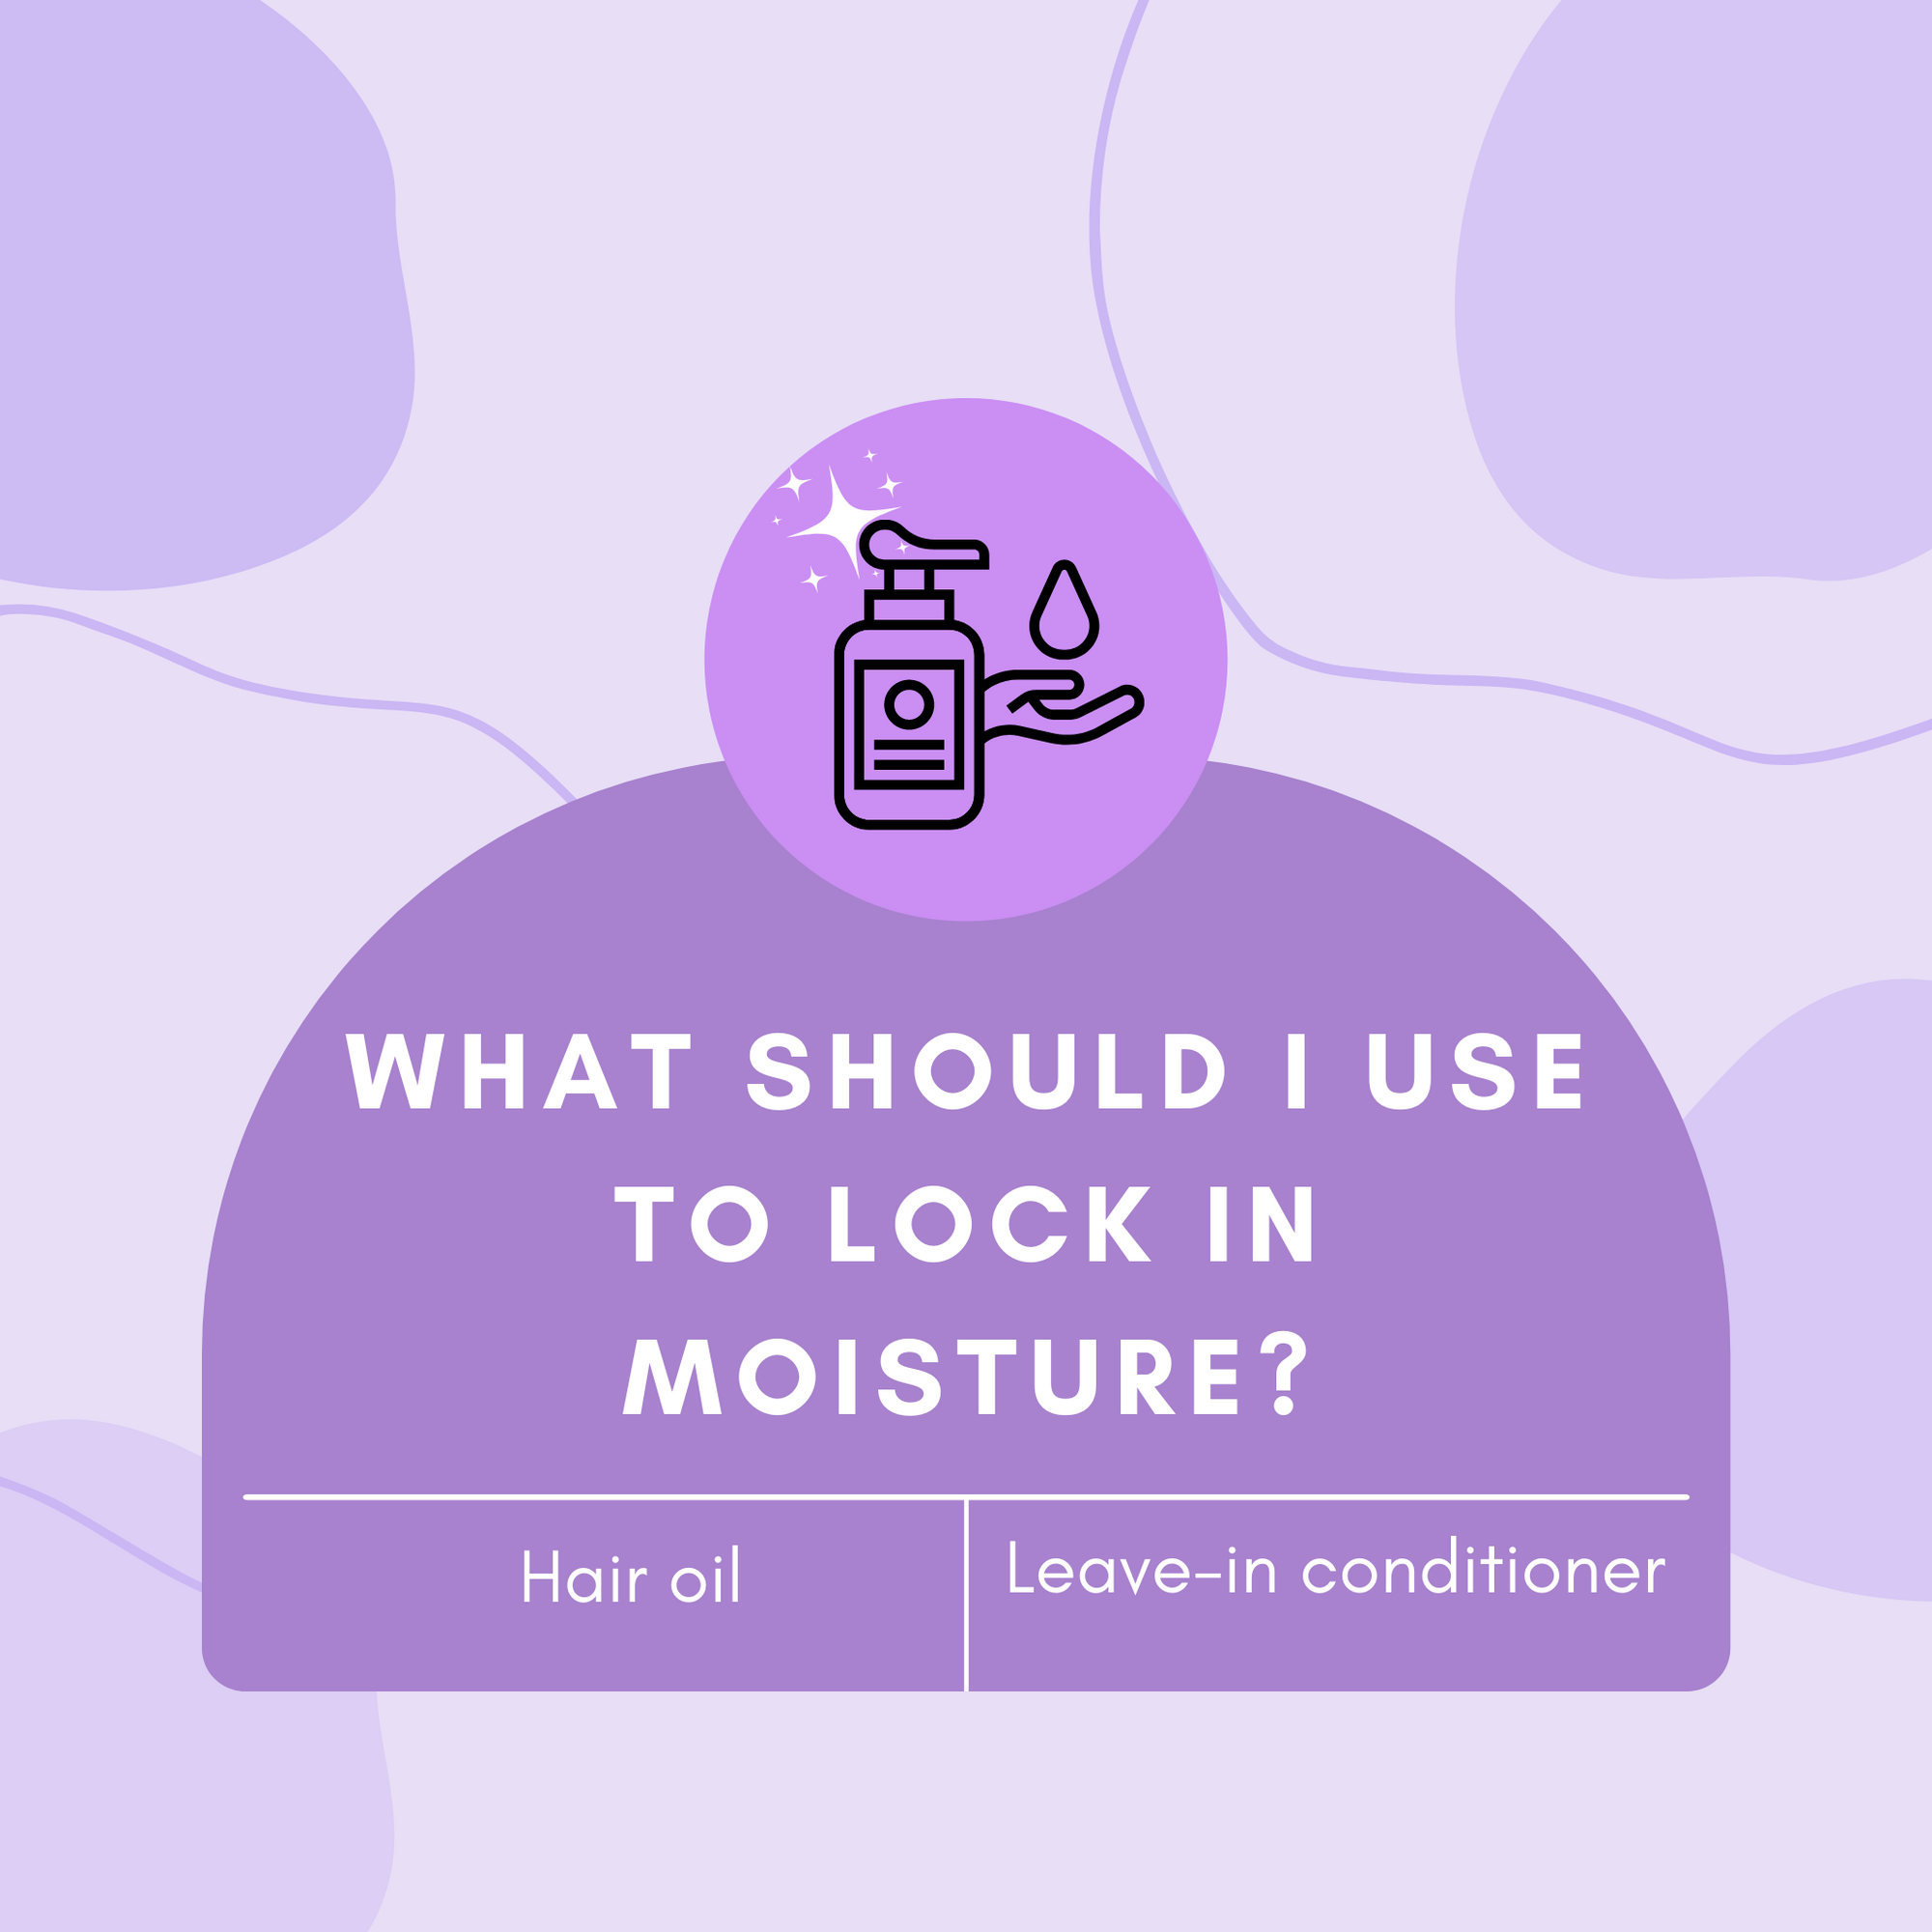 What Should I use to Lock in Moisture?